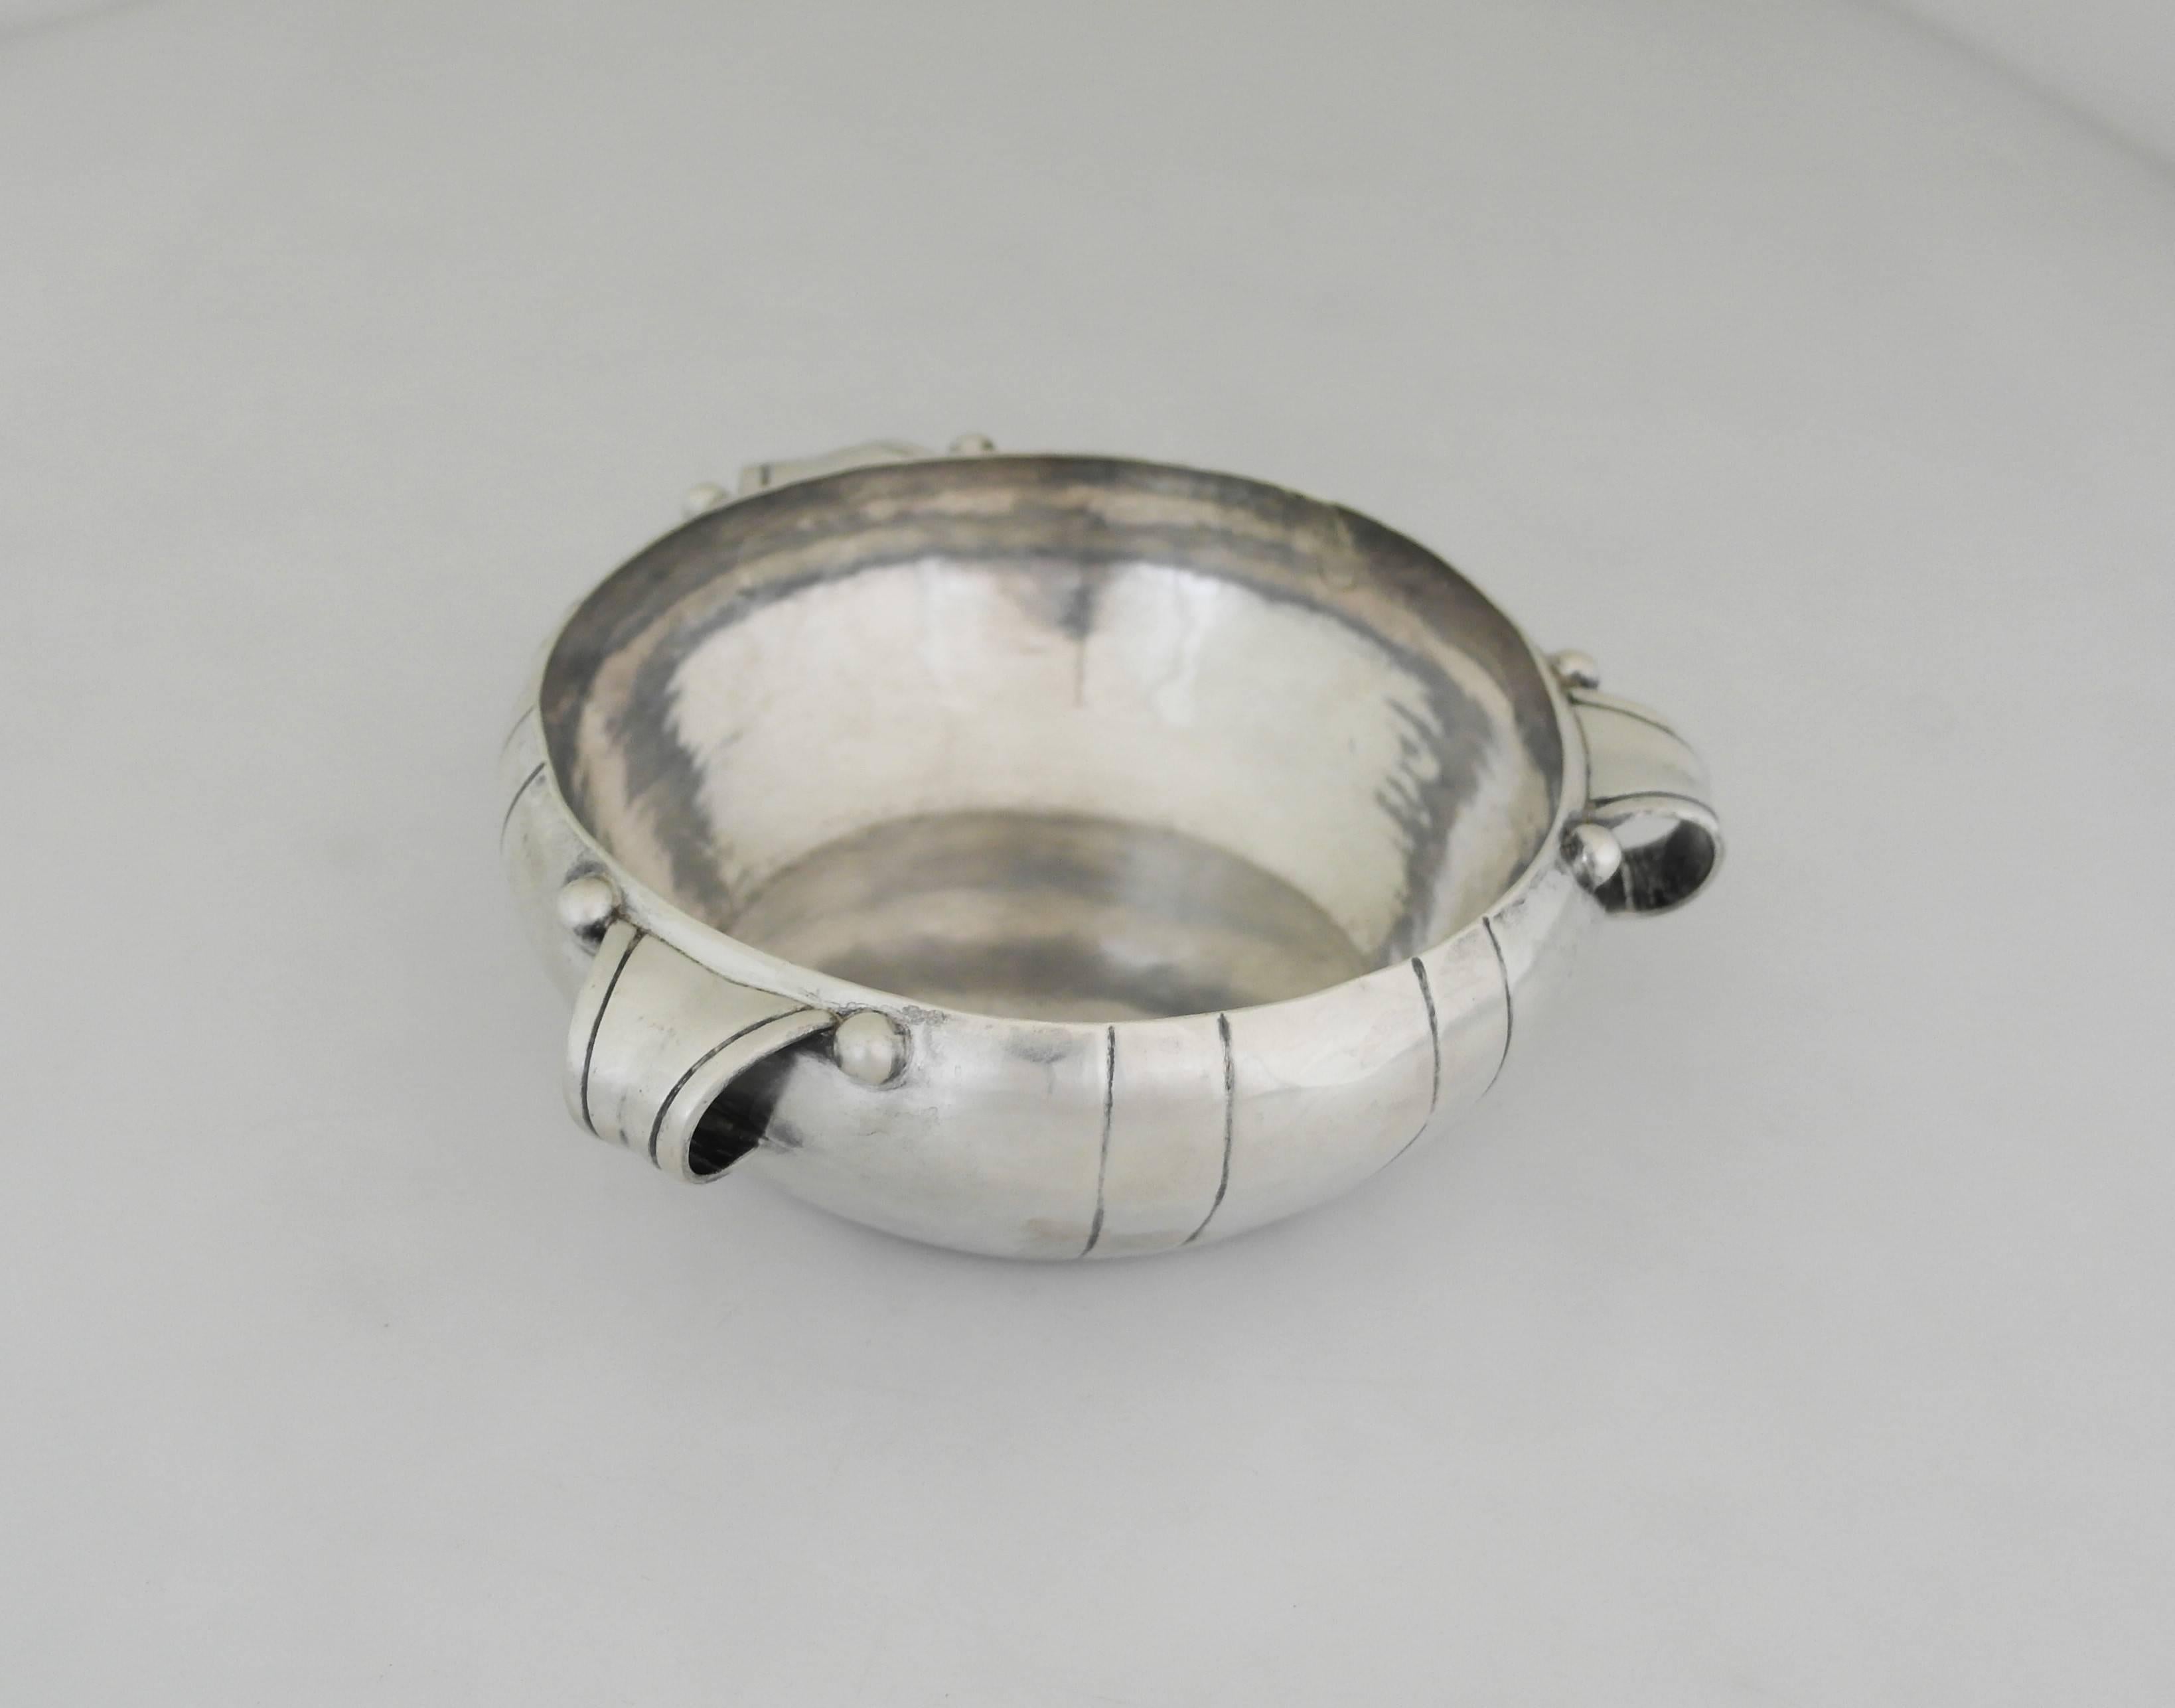 William Spratling Hand-Wrought Sterling Silver Bowl 3